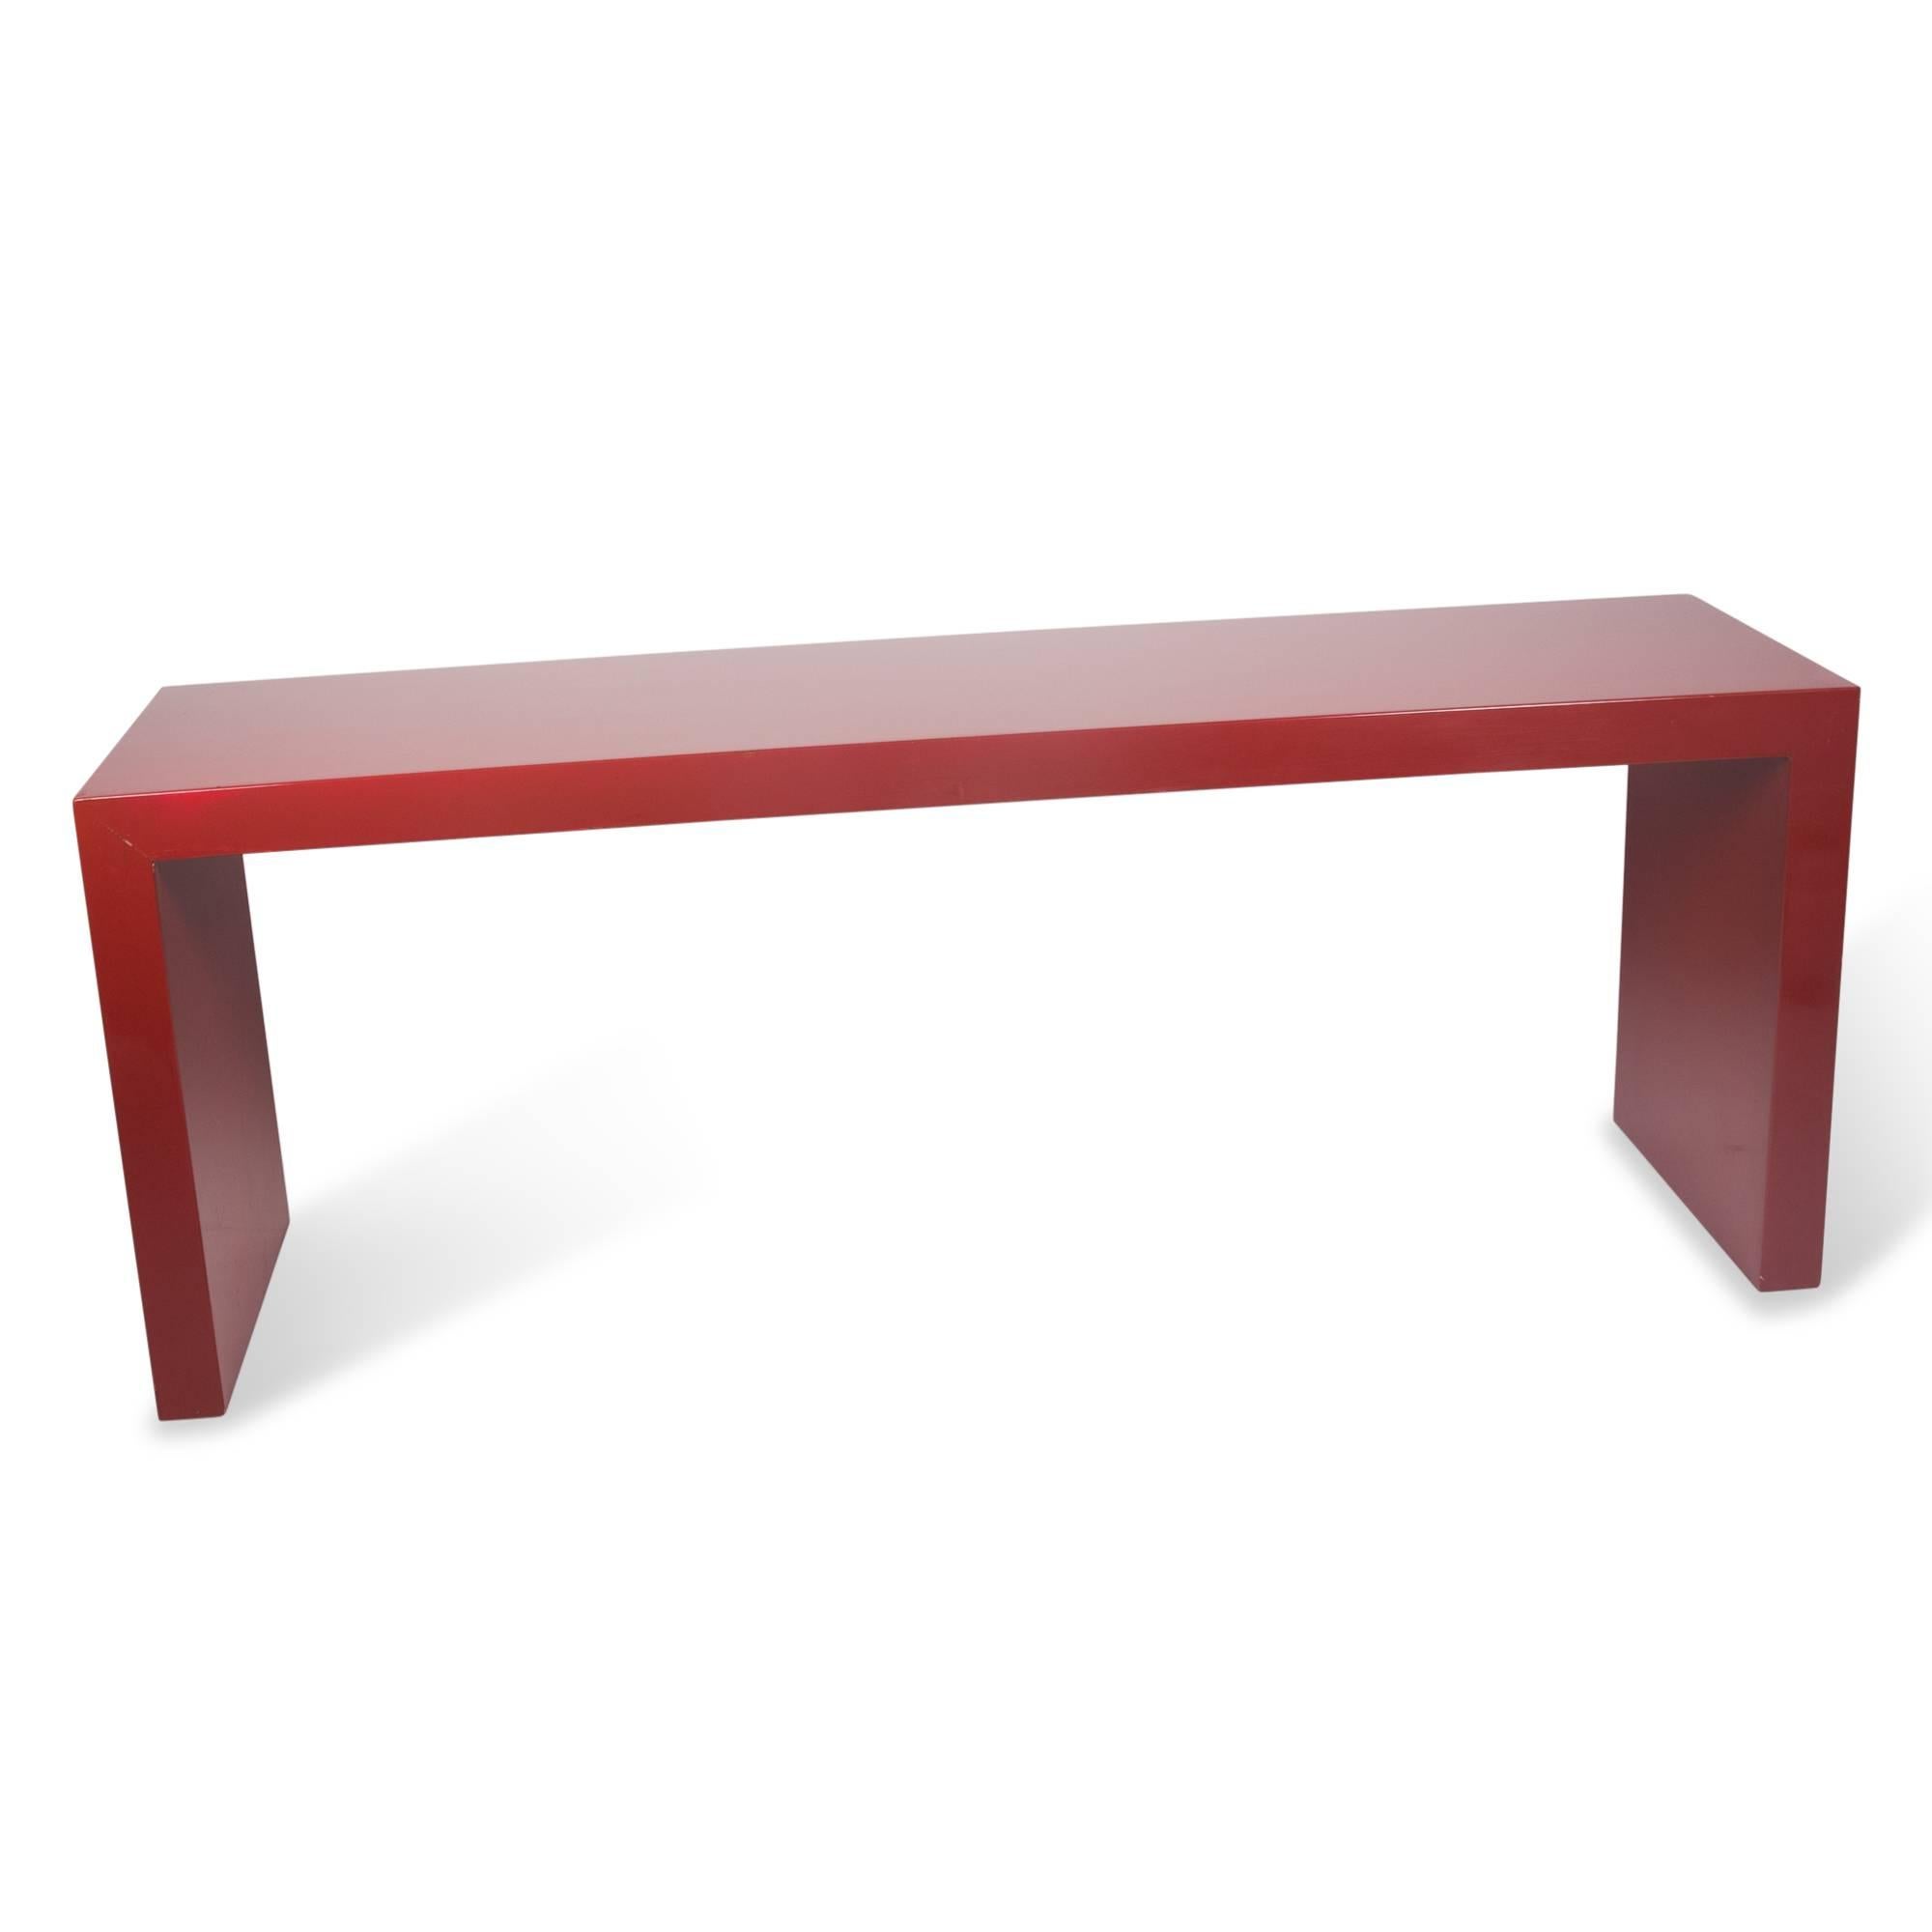 Red lacquered Parsons style console table, United States, 1960s. Measures: Length 72 in, depth 19 in, height 27 1/2 in.